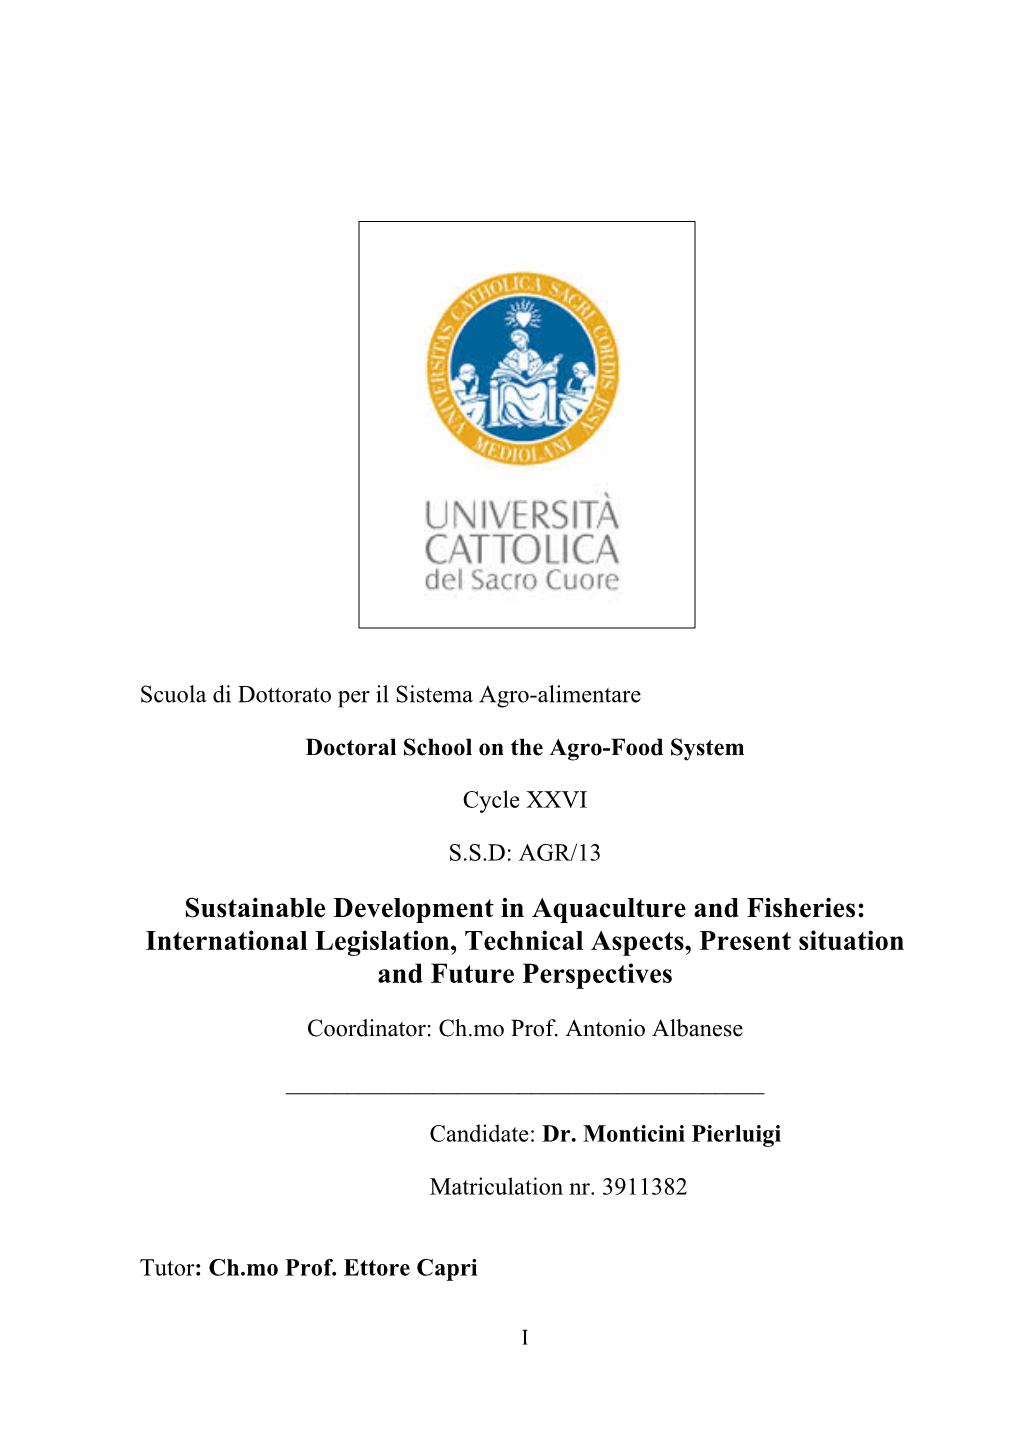 Sustainable Development in Aquaculture and Fisheries: International Legislation, Technical Aspects, Present Situation and Future Perspectives